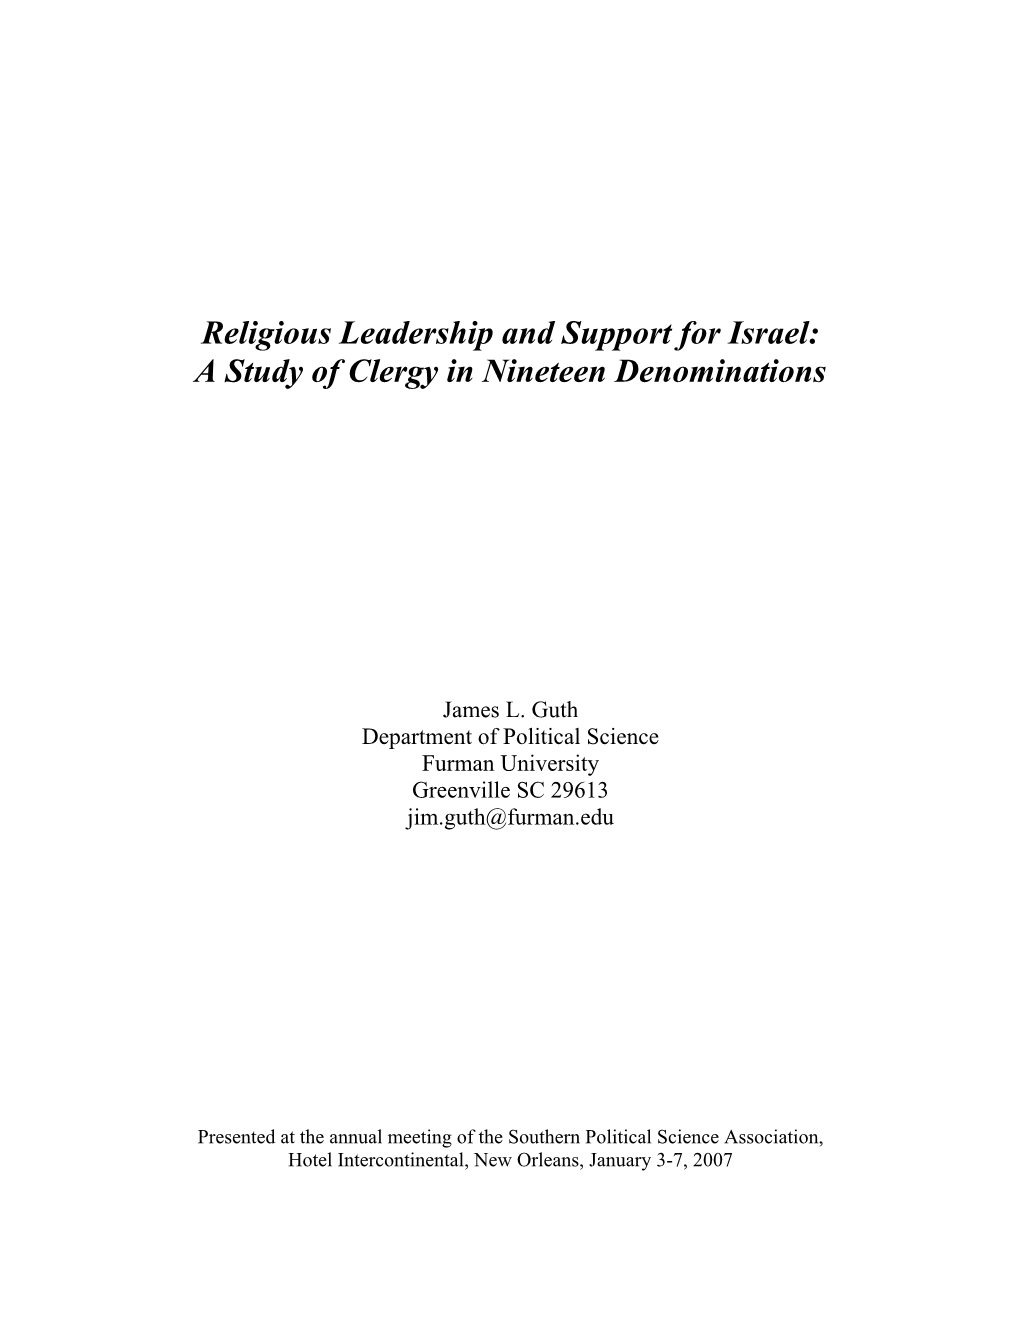 Religious Leadership and Support for Israel: a Study of Clergy in Nineteen Denominations